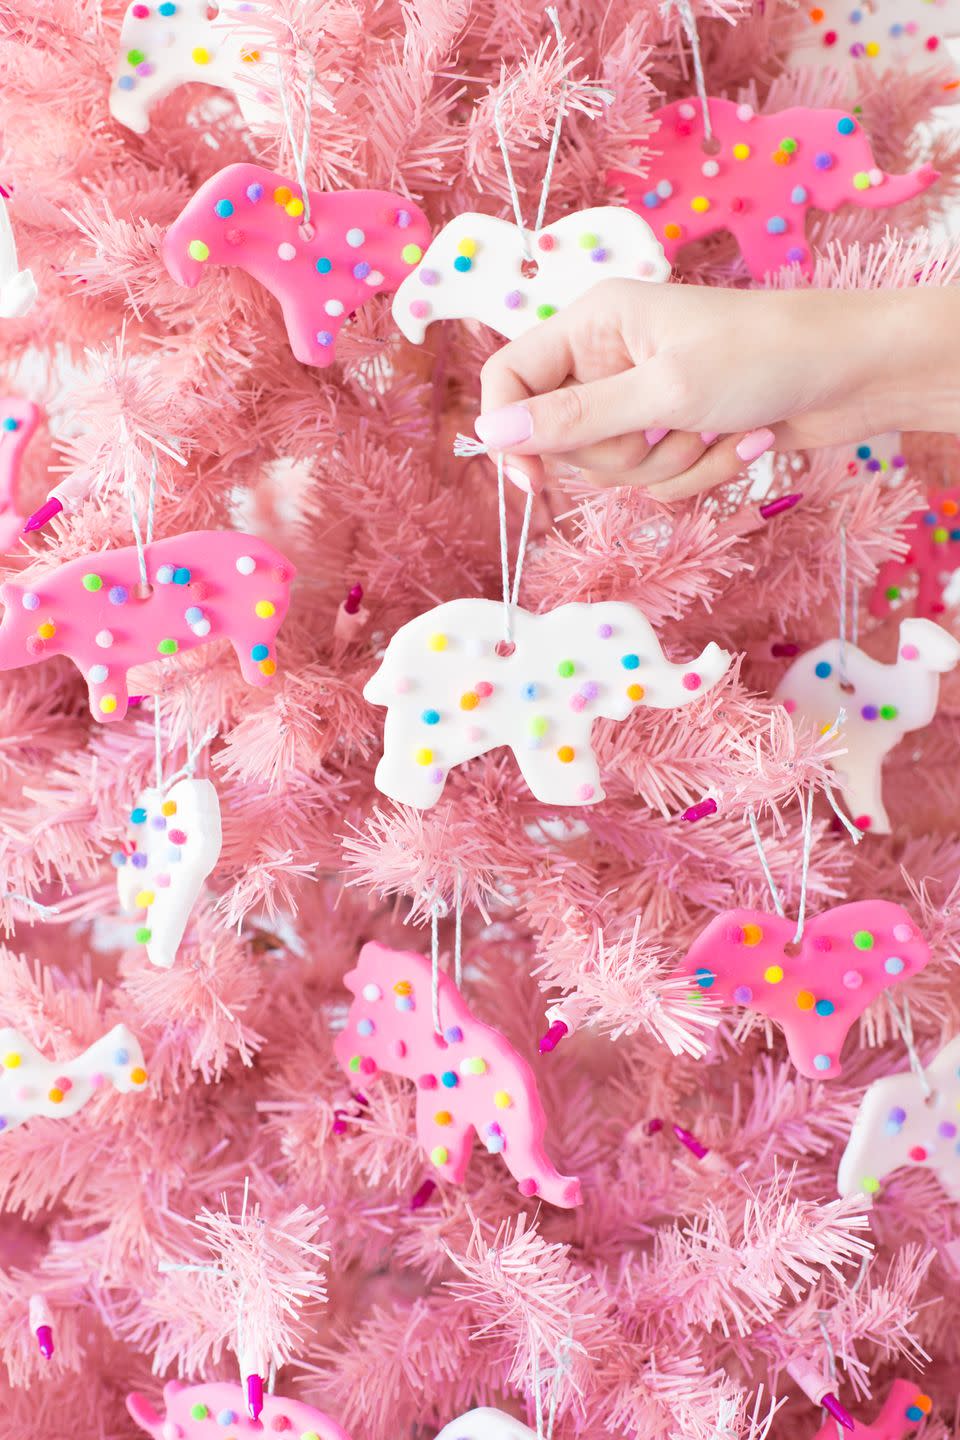 Animal Cookie Ornaments